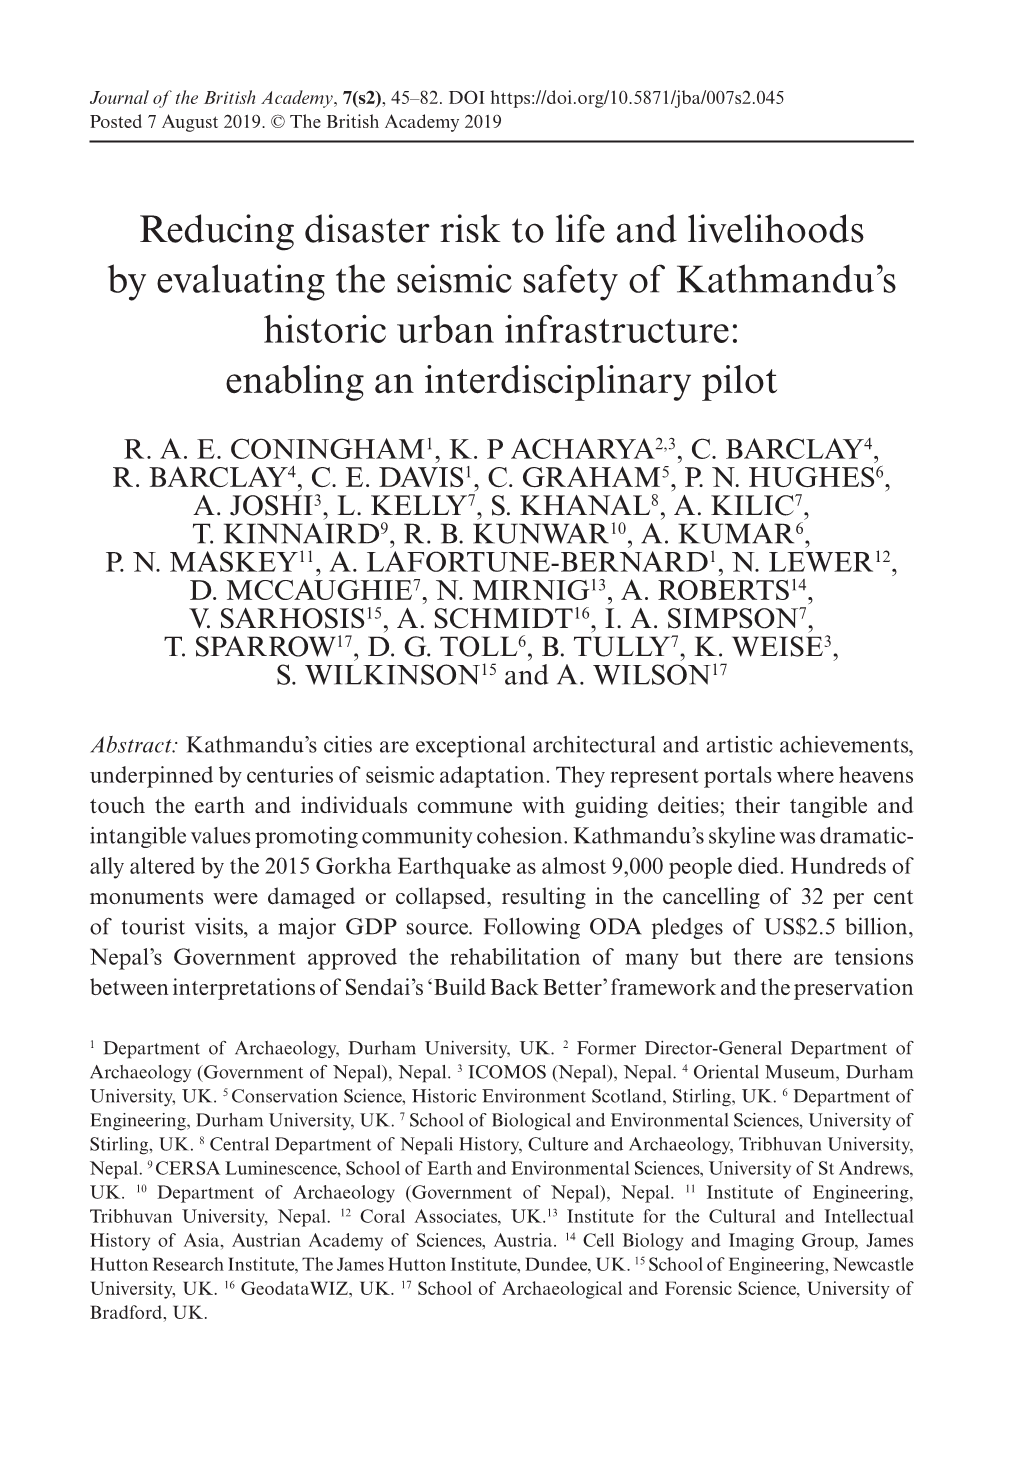 Reducing Disaster Risk to Life and Livelihoods by Evaluating the Seismic Safety of Kathmandu’S Historic Urban Infrastructure: Enabling an Interdisciplinary Pilot